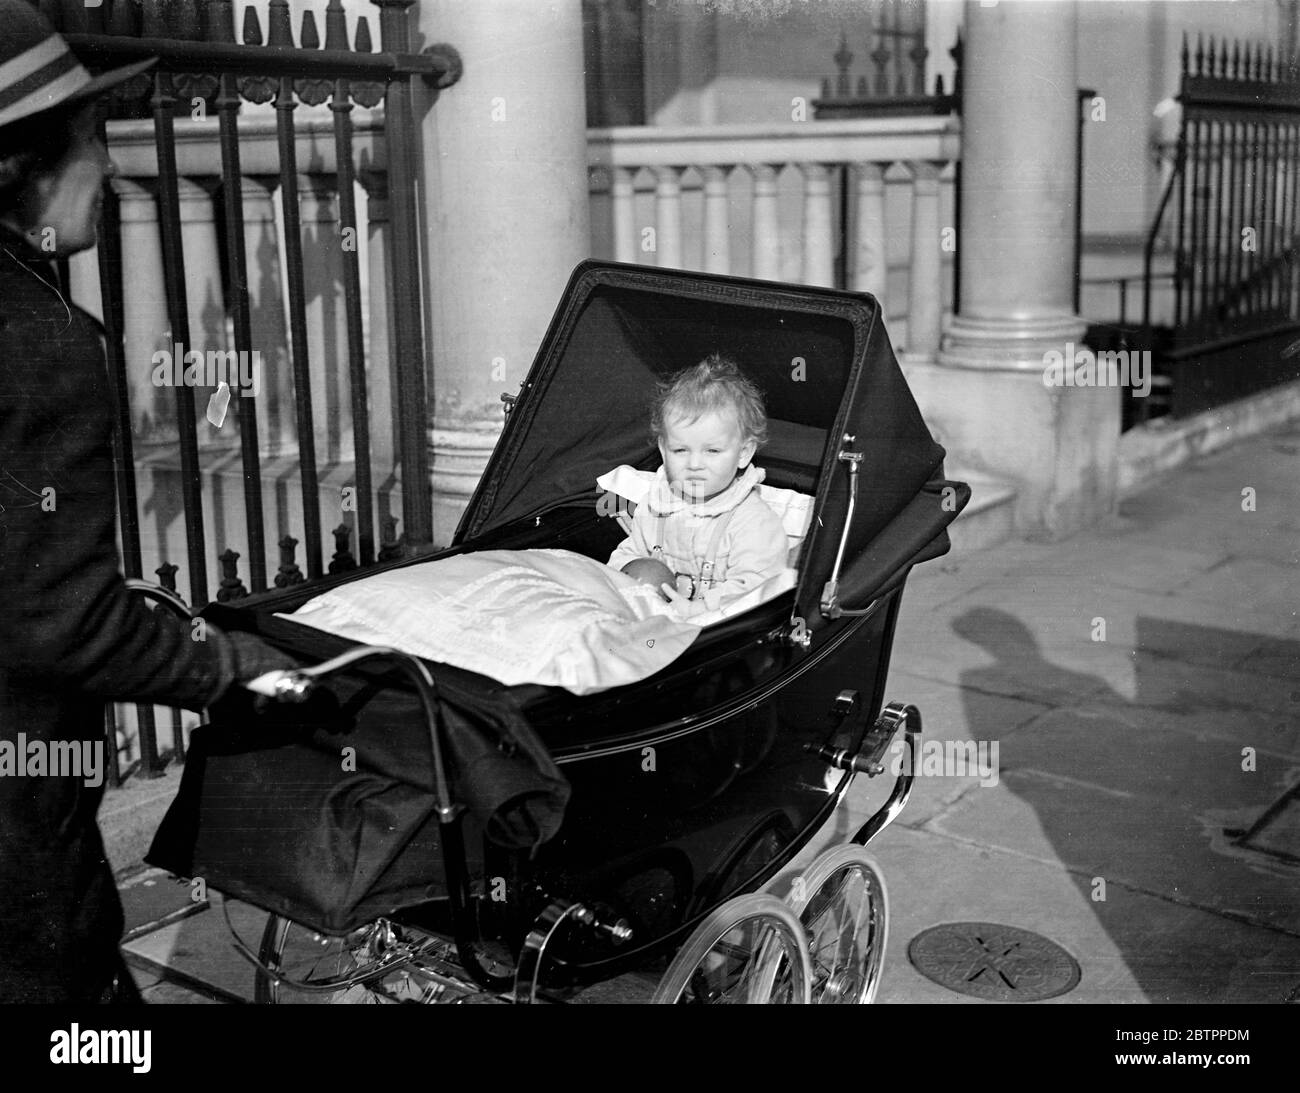 Princess Alexandra plays ball now!. Princess Alexandra, baby daughter of the Duke and Duchess of Kent clutching her ball as she returned to 3 Belgrave Square, after an outing in the sunshine. The Duke and Duchess are still in Athens owing to the death of the Duchess's father. 11 February1938 Stock Photo